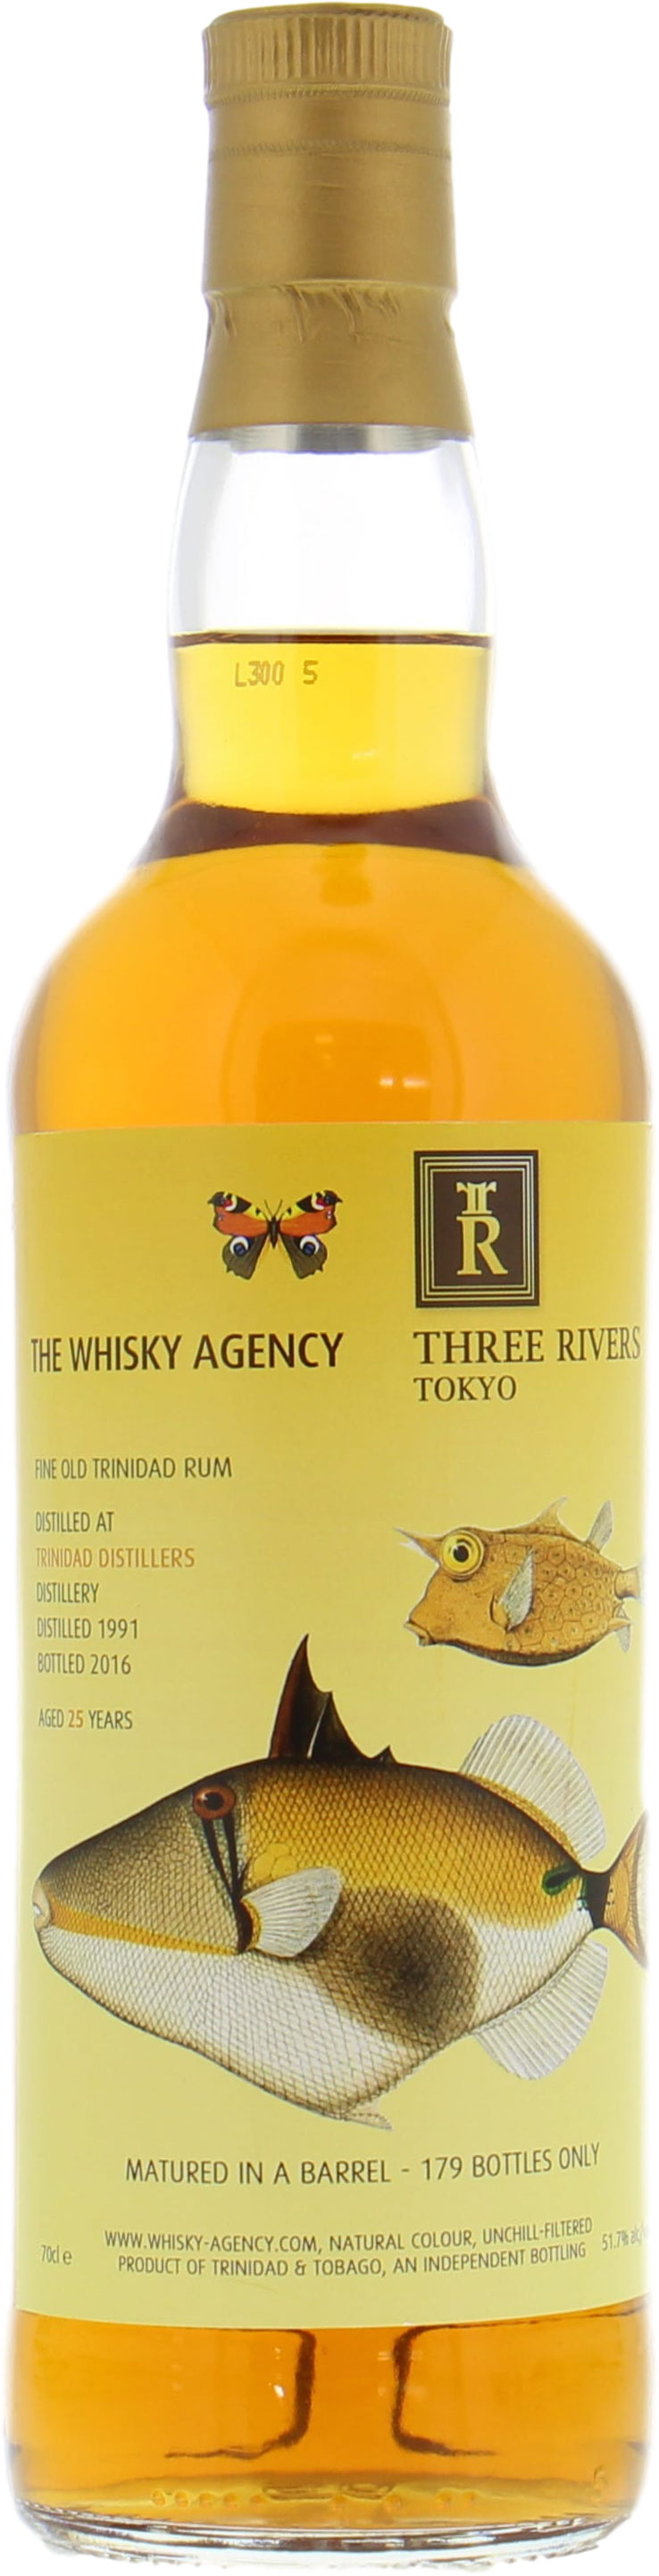 Trinidad - The Whisky Agency 3 Rivers Tokyo 25 Years Old 51.7% 1991 Nederlands